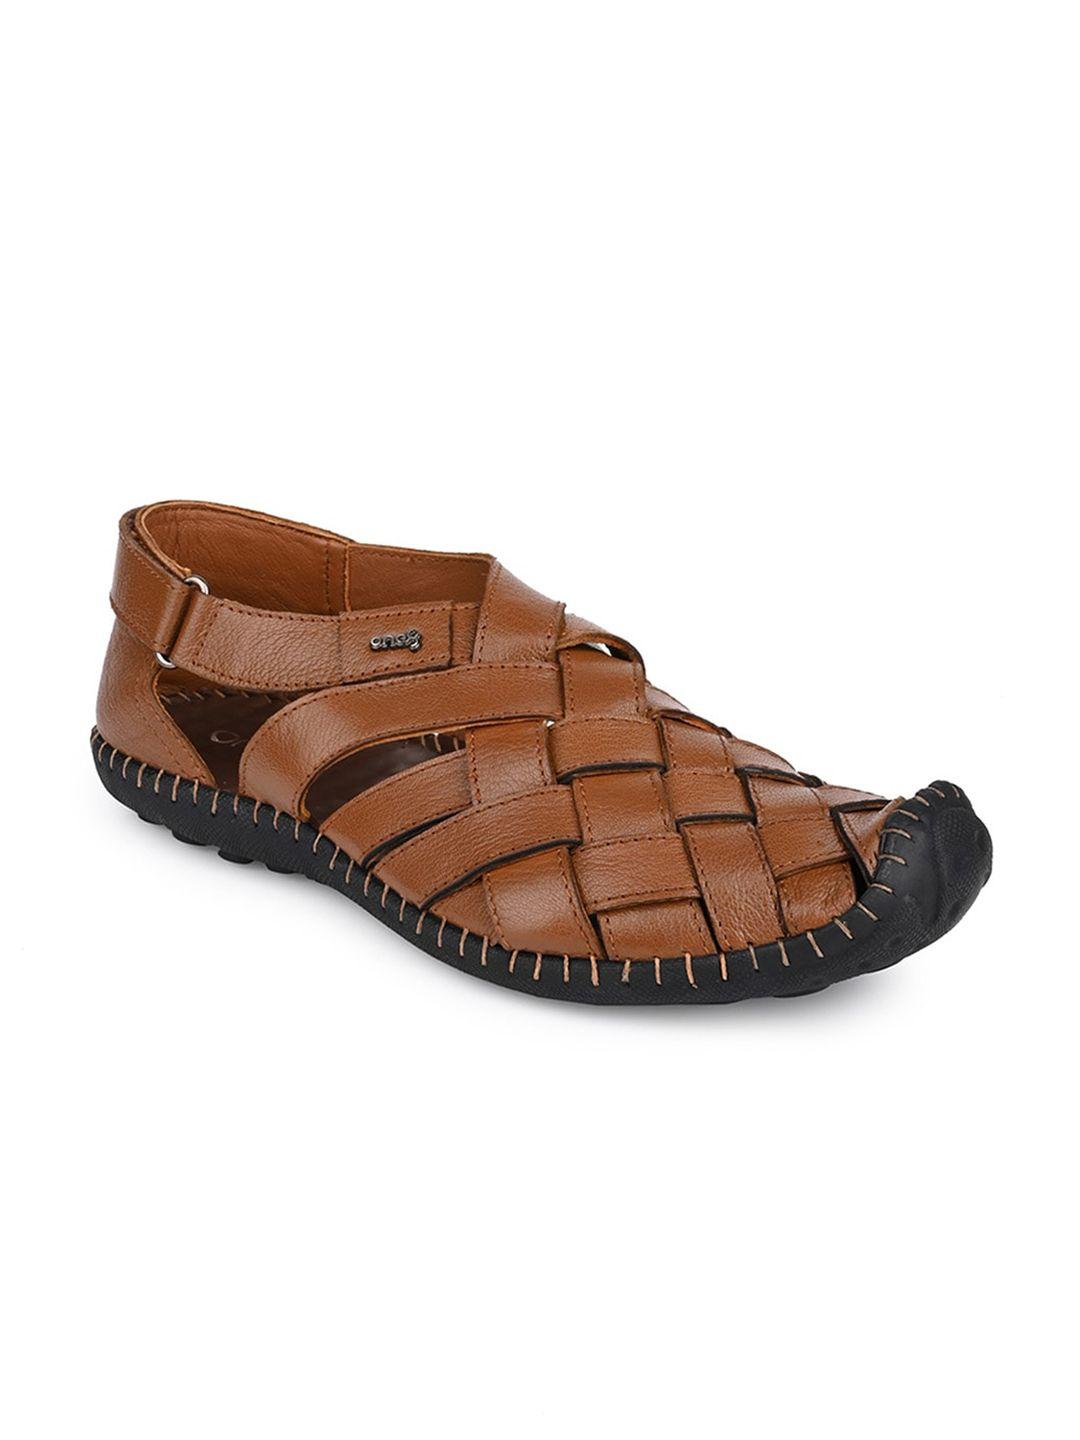 one8 men leather fisherman sandals